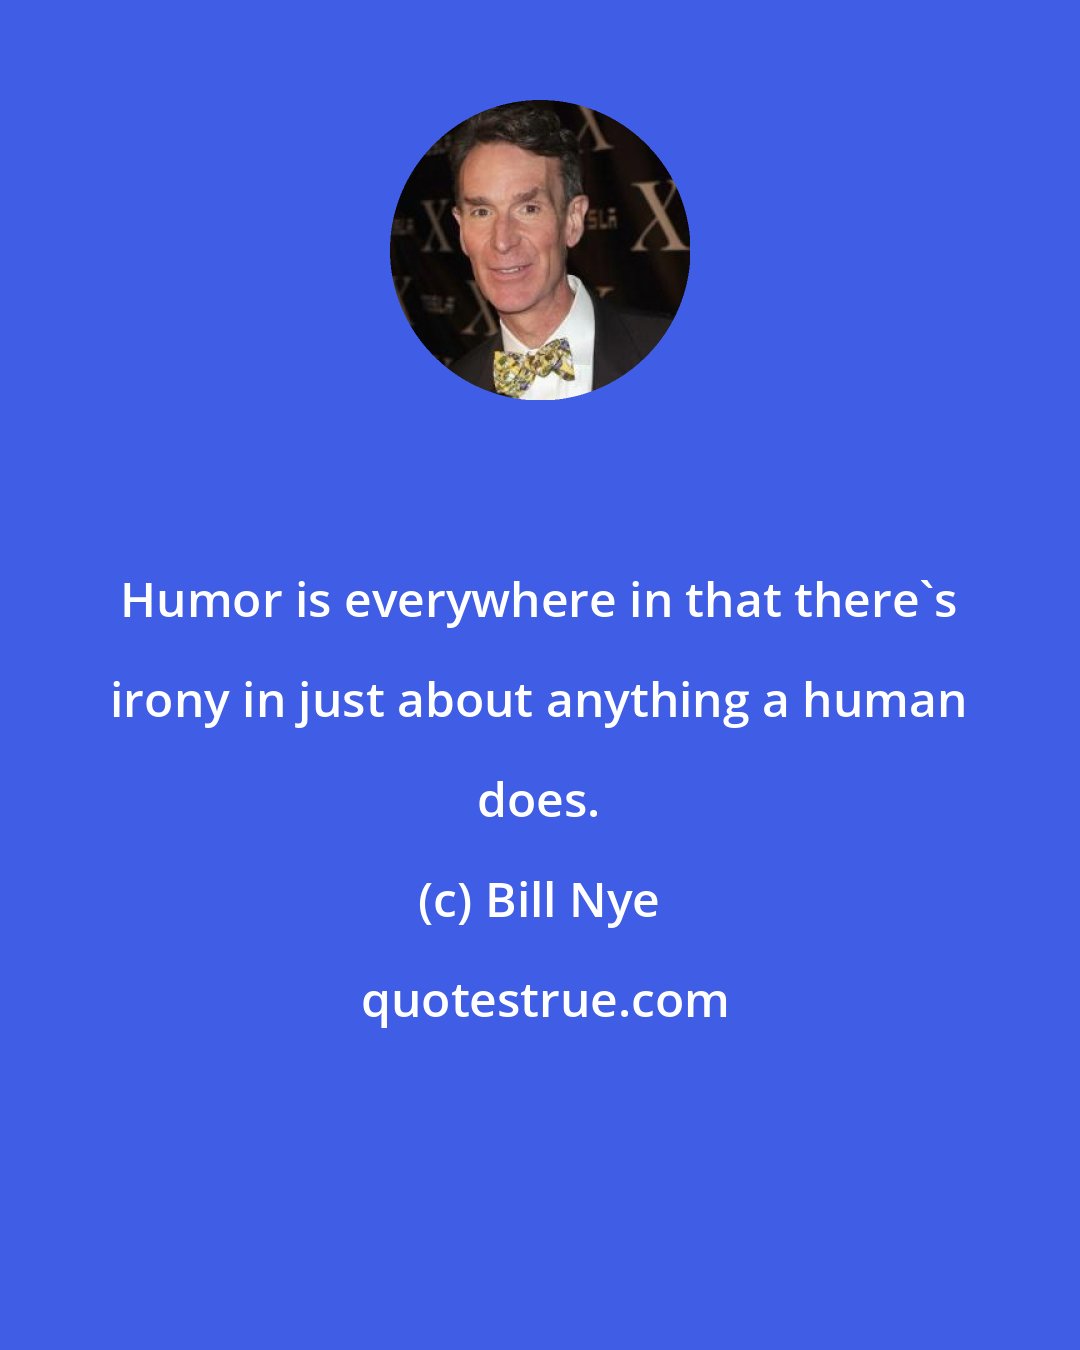 Bill Nye: Humor is everywhere in that there's irony in just about anything a human does.